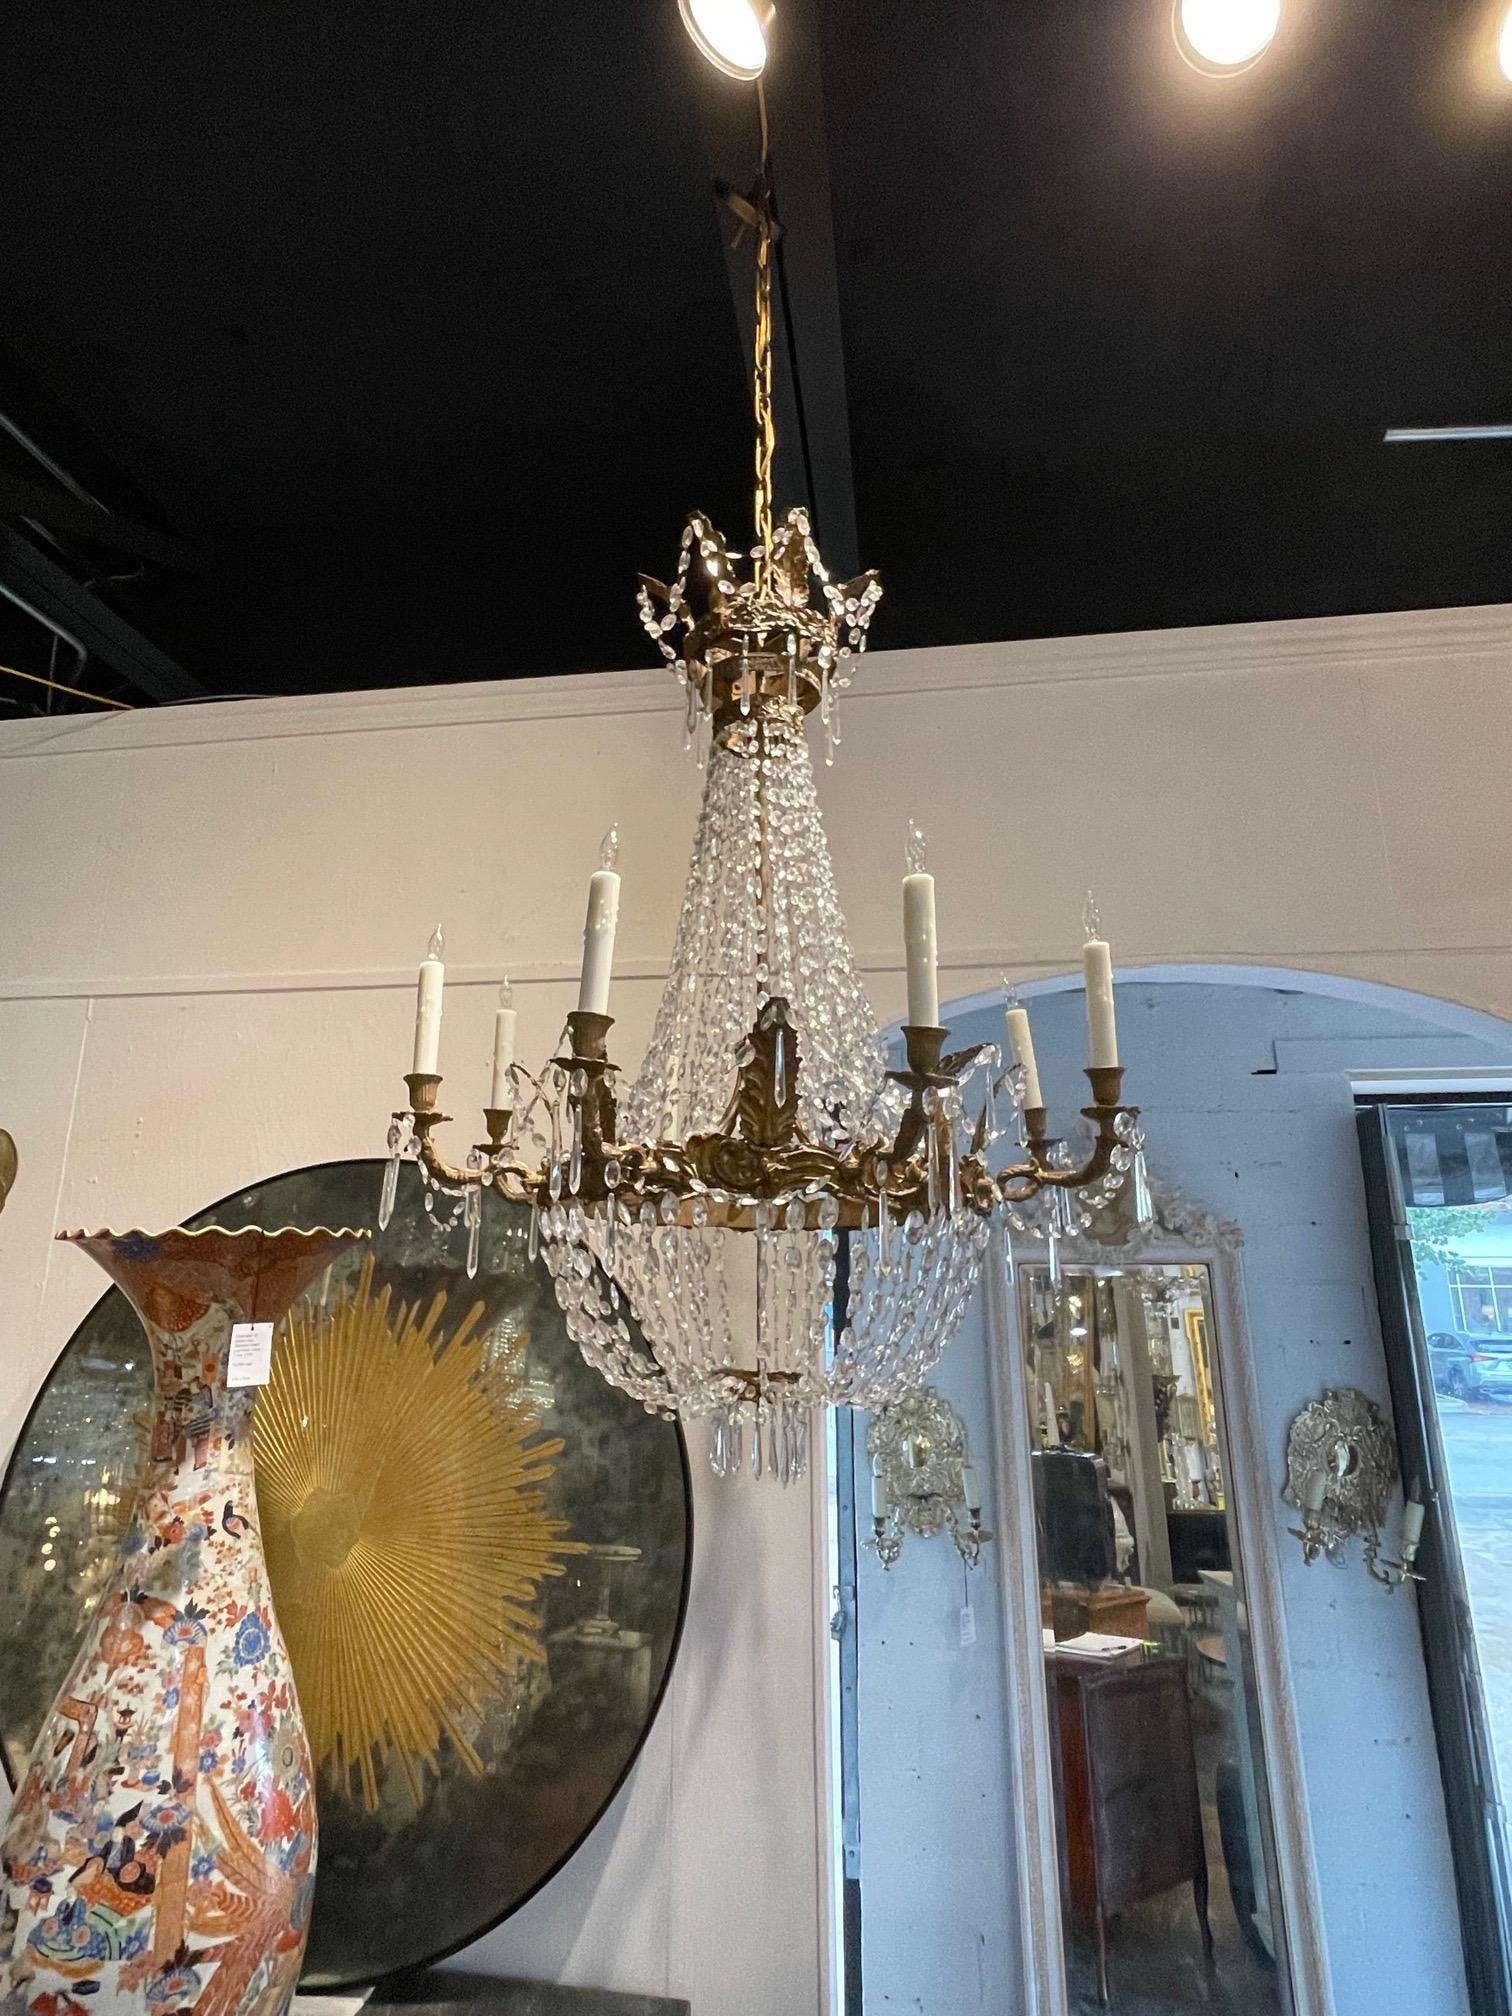 Very fine large 18th century Italian Empire style crystal and gilt tole basket chandelier. This fixture has 8 lights and is covered in shimmering crystals. So elegant!!